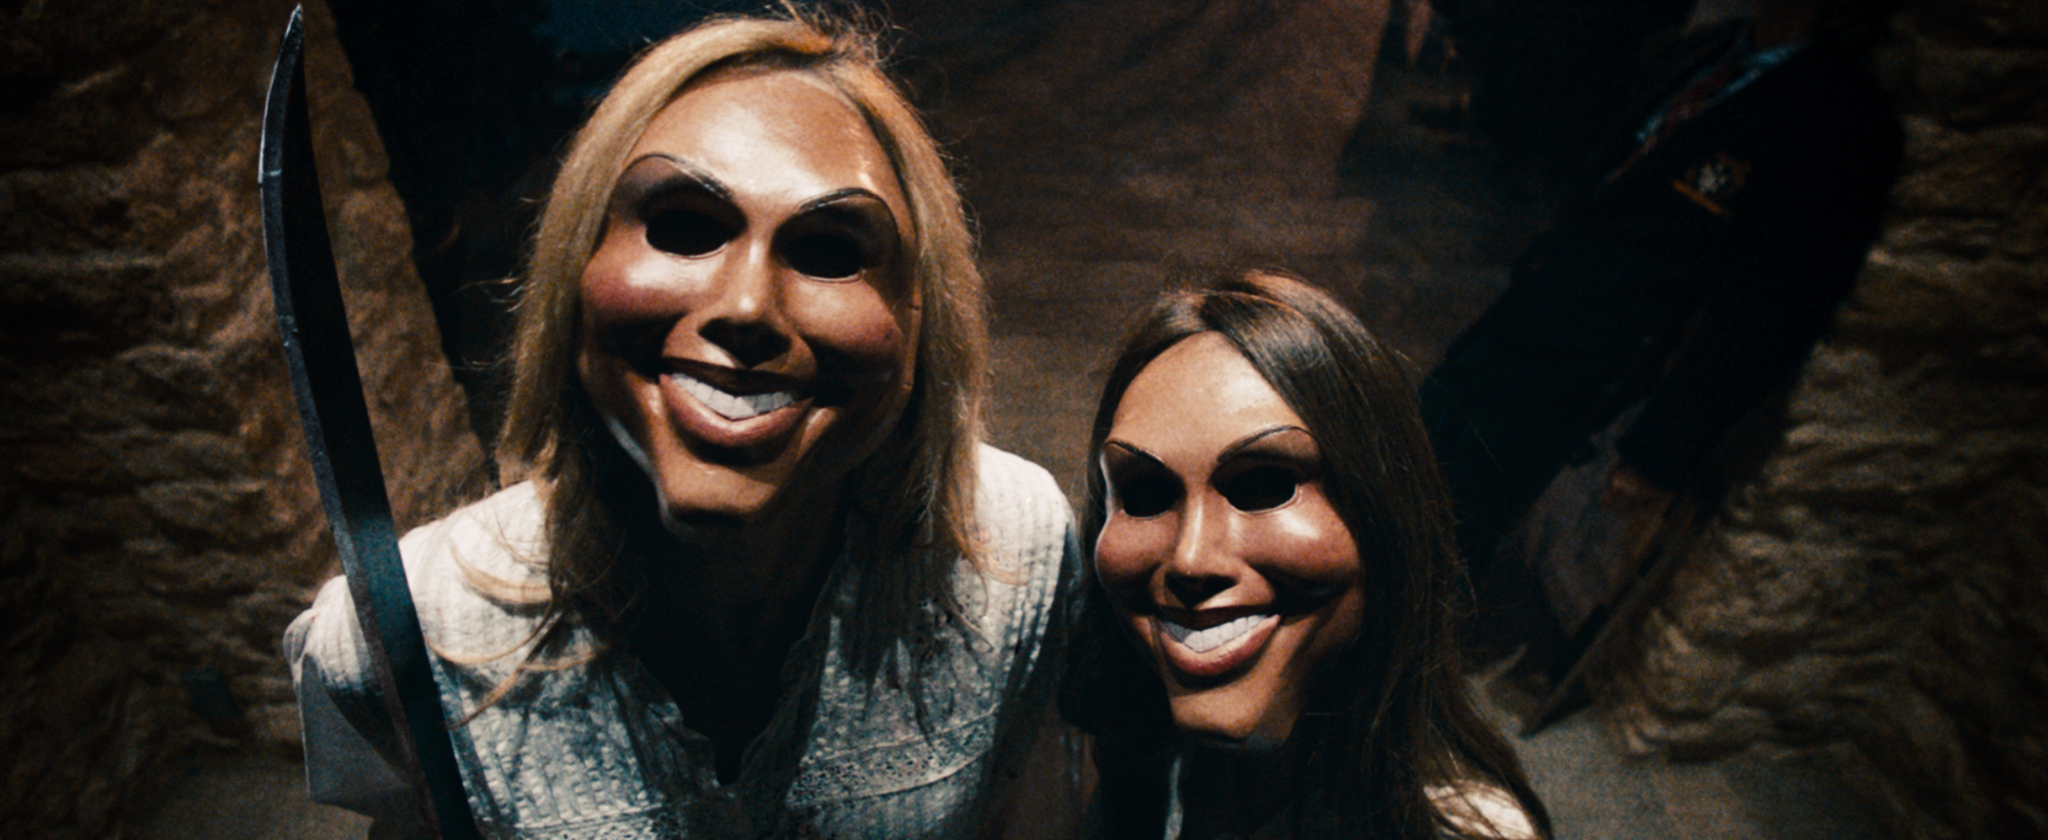 Is The Purge 6 Still In Development With Frank Grillo To Return?